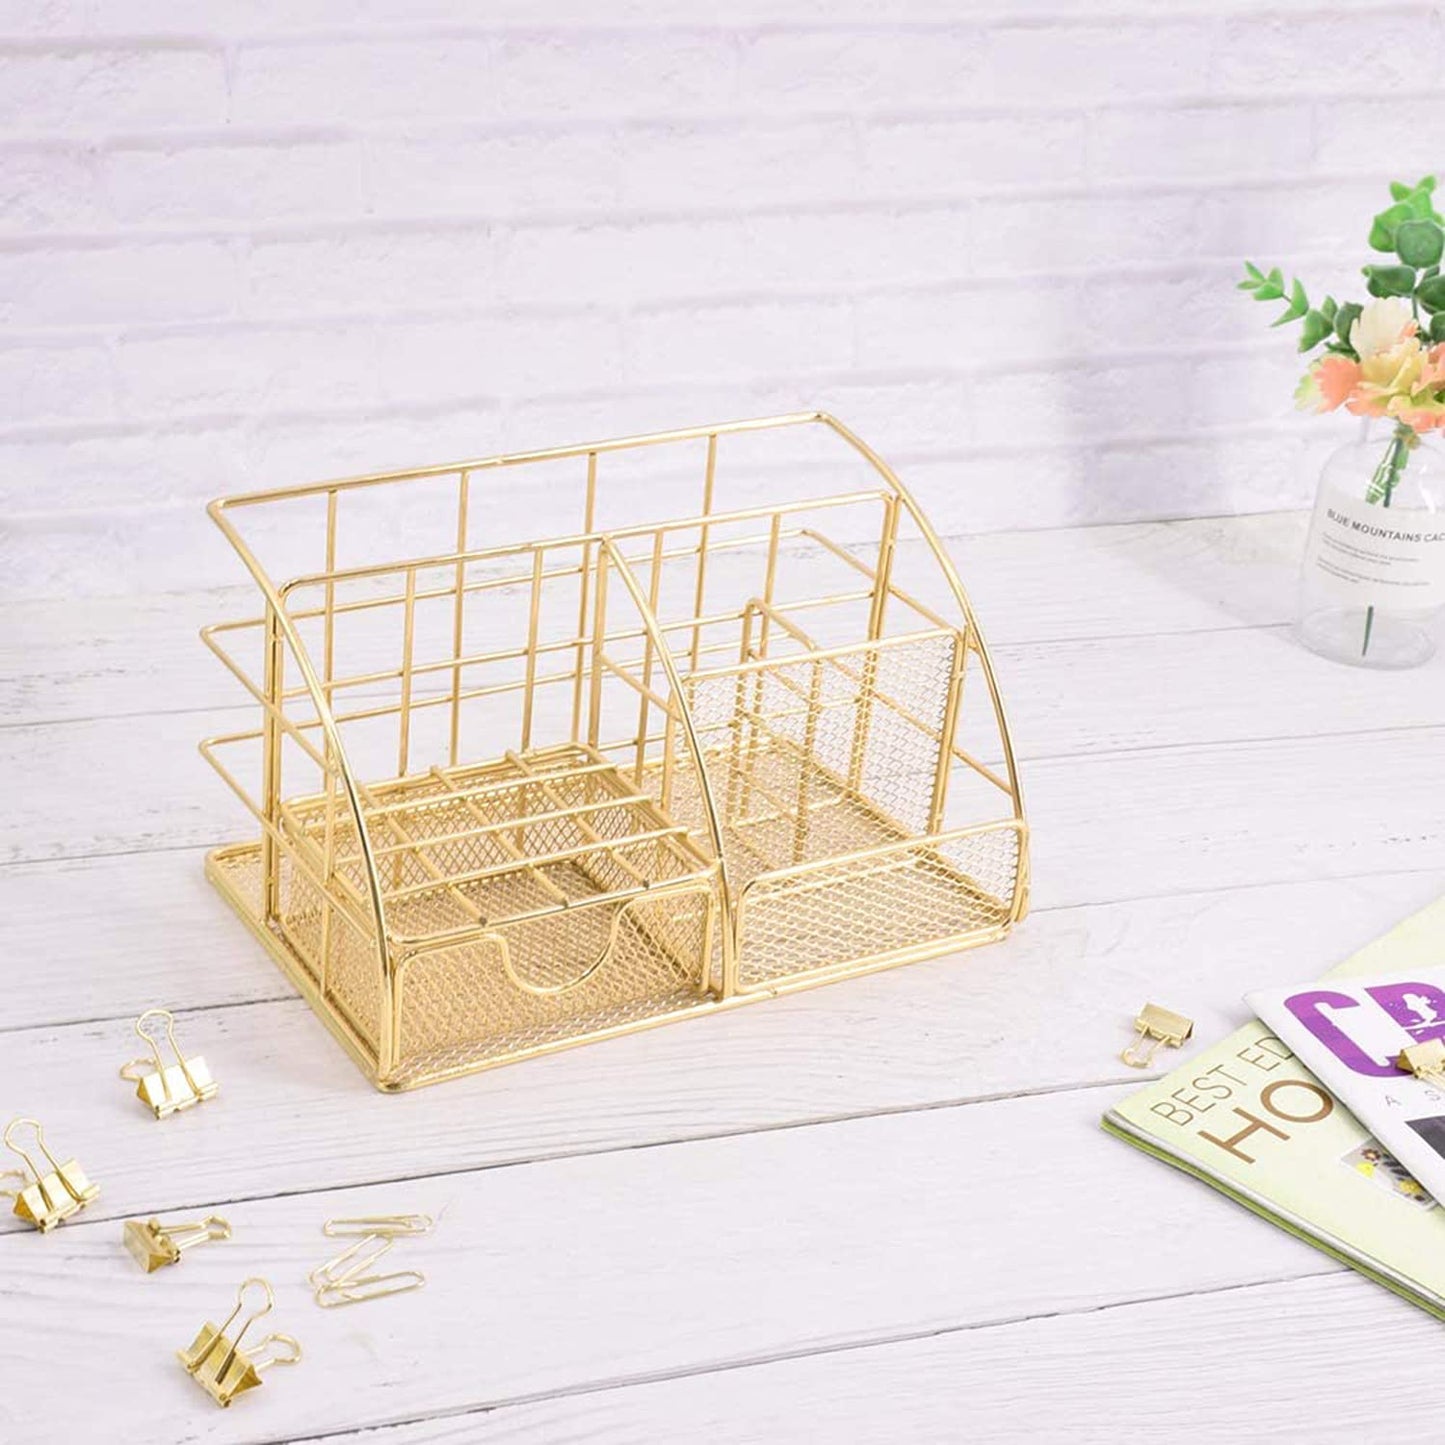 Desk Organizer, Mesh Office Supplies Desk Accessories, Features 5 Compartments + 1 Mini Sliding Drawer, All-in-one Office Supplies, Office Desk Organizers and Storage (Plating-Gold)